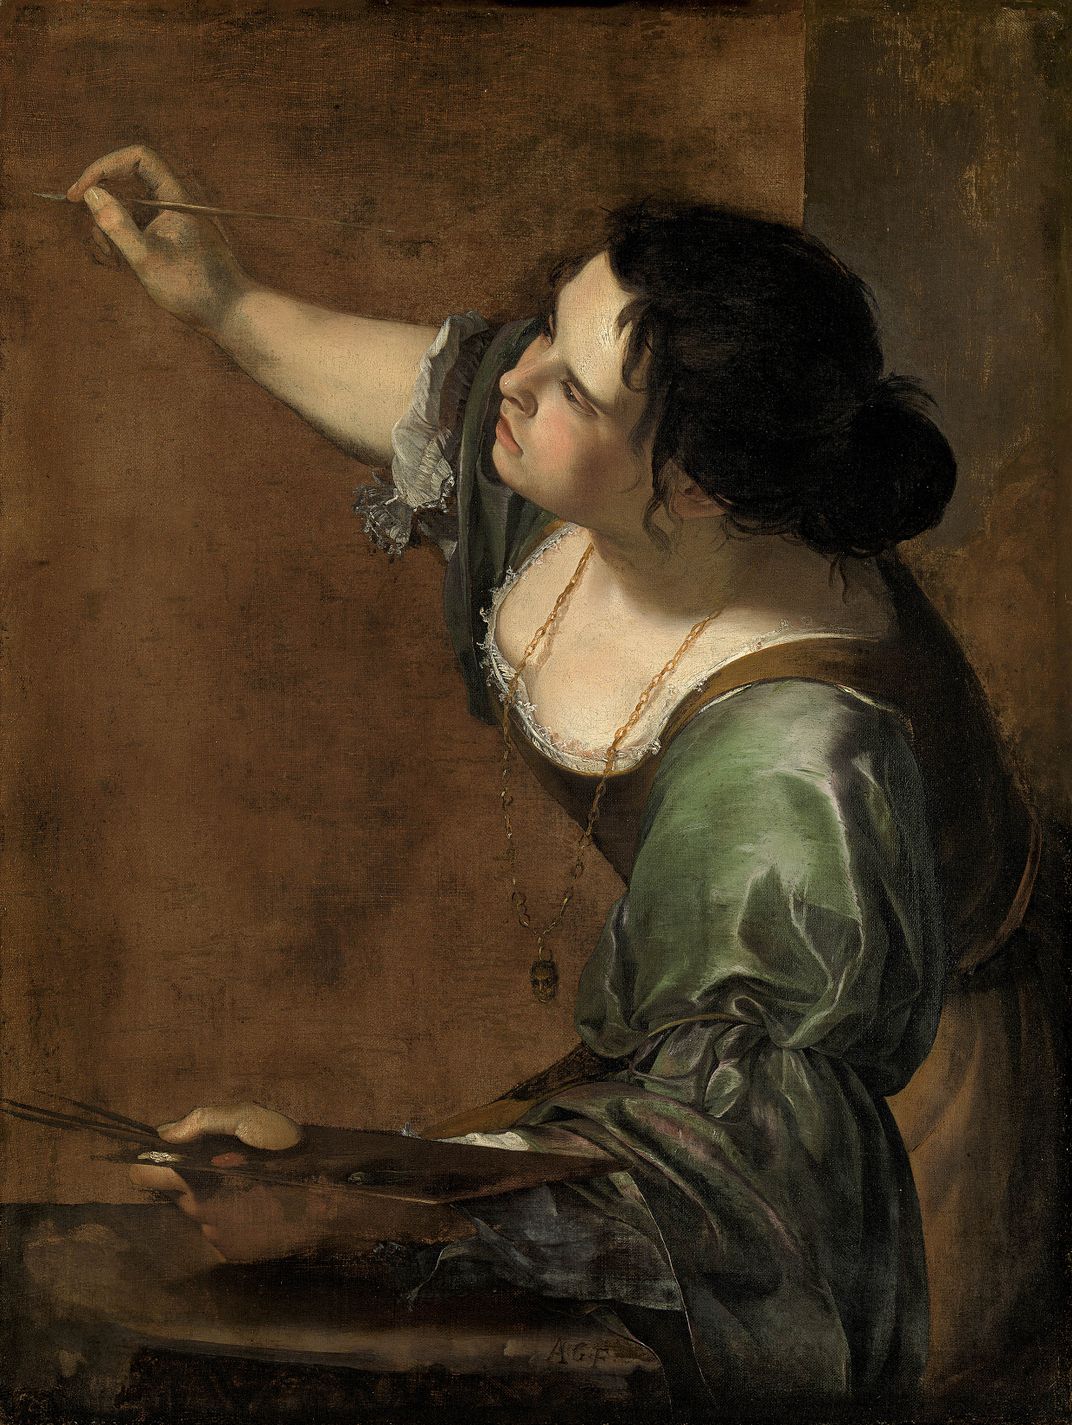 Artemisia Gentileschi, Self-Portrait as the Allegory of Painting, circa 1638 to 1639